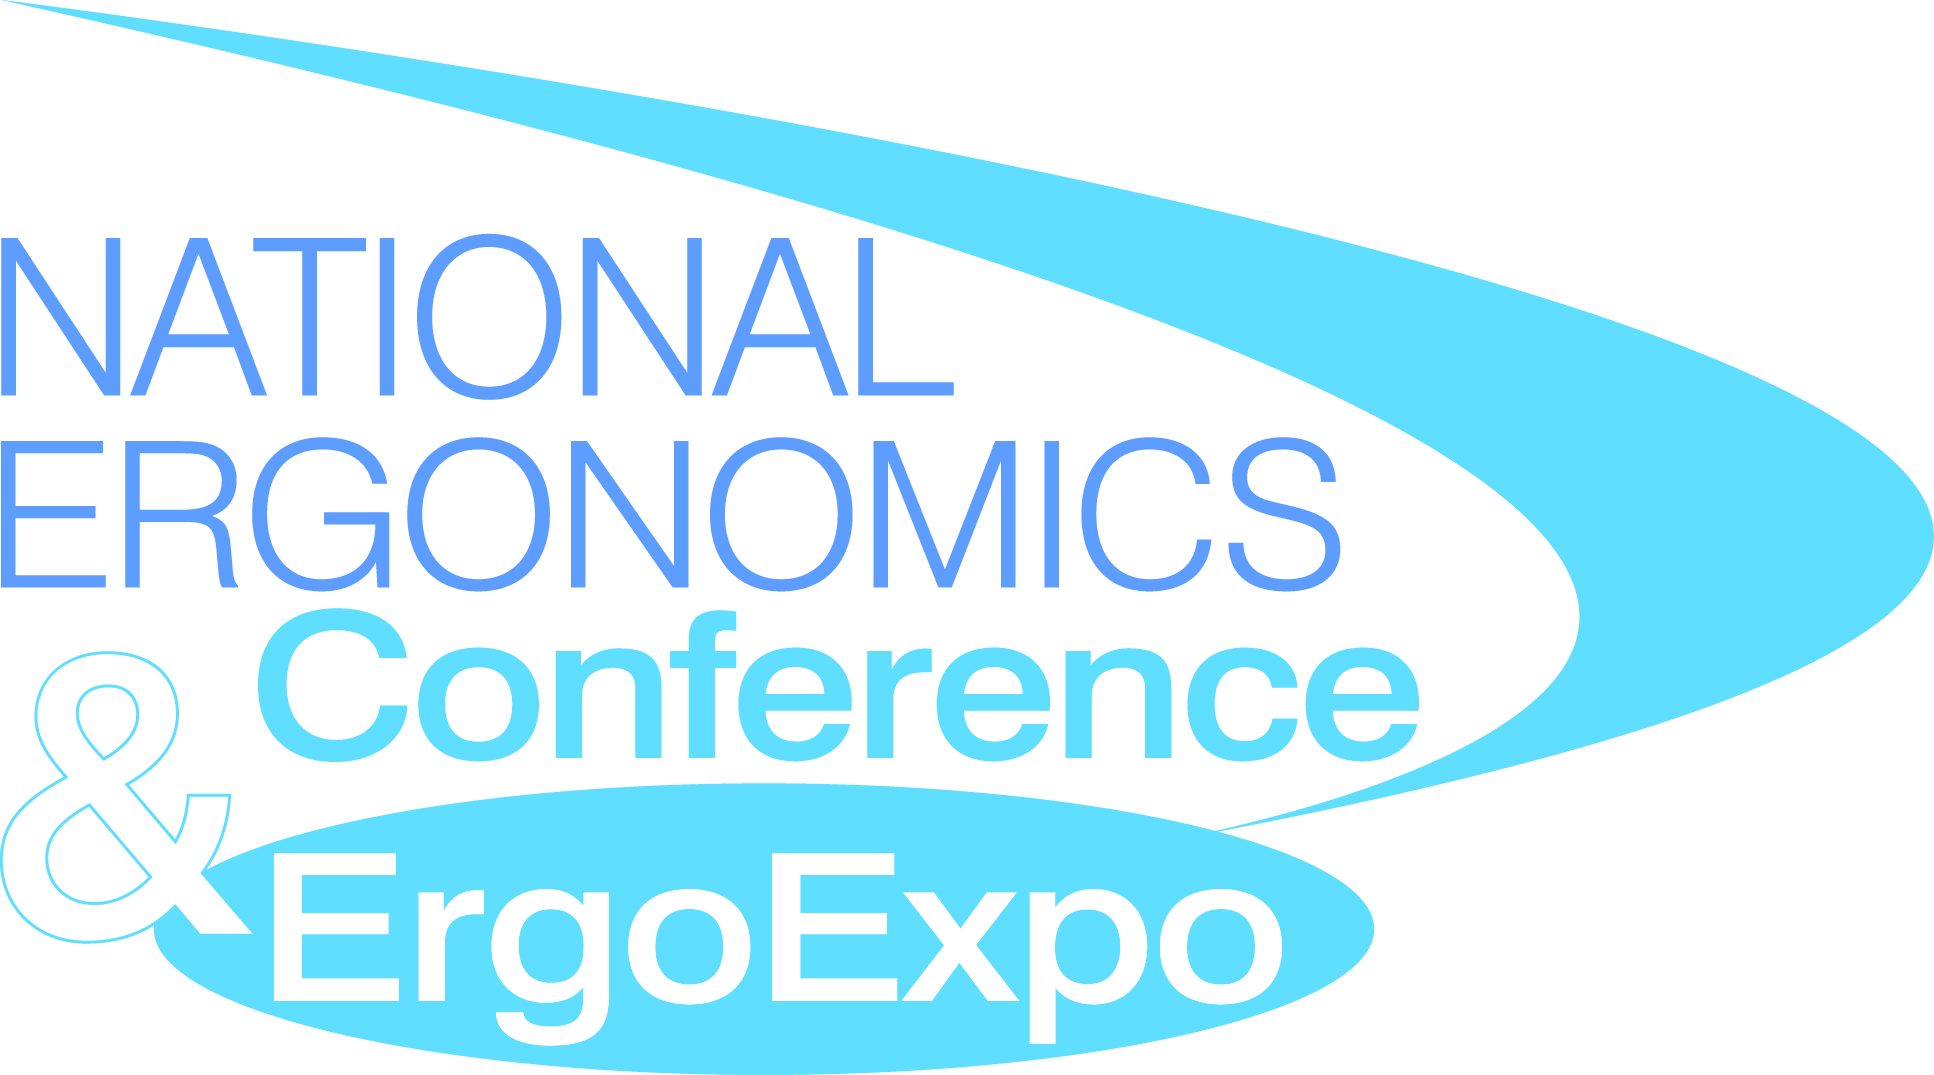 National Ergonomics Conference & ErgoExpo Grows Attendance by 30